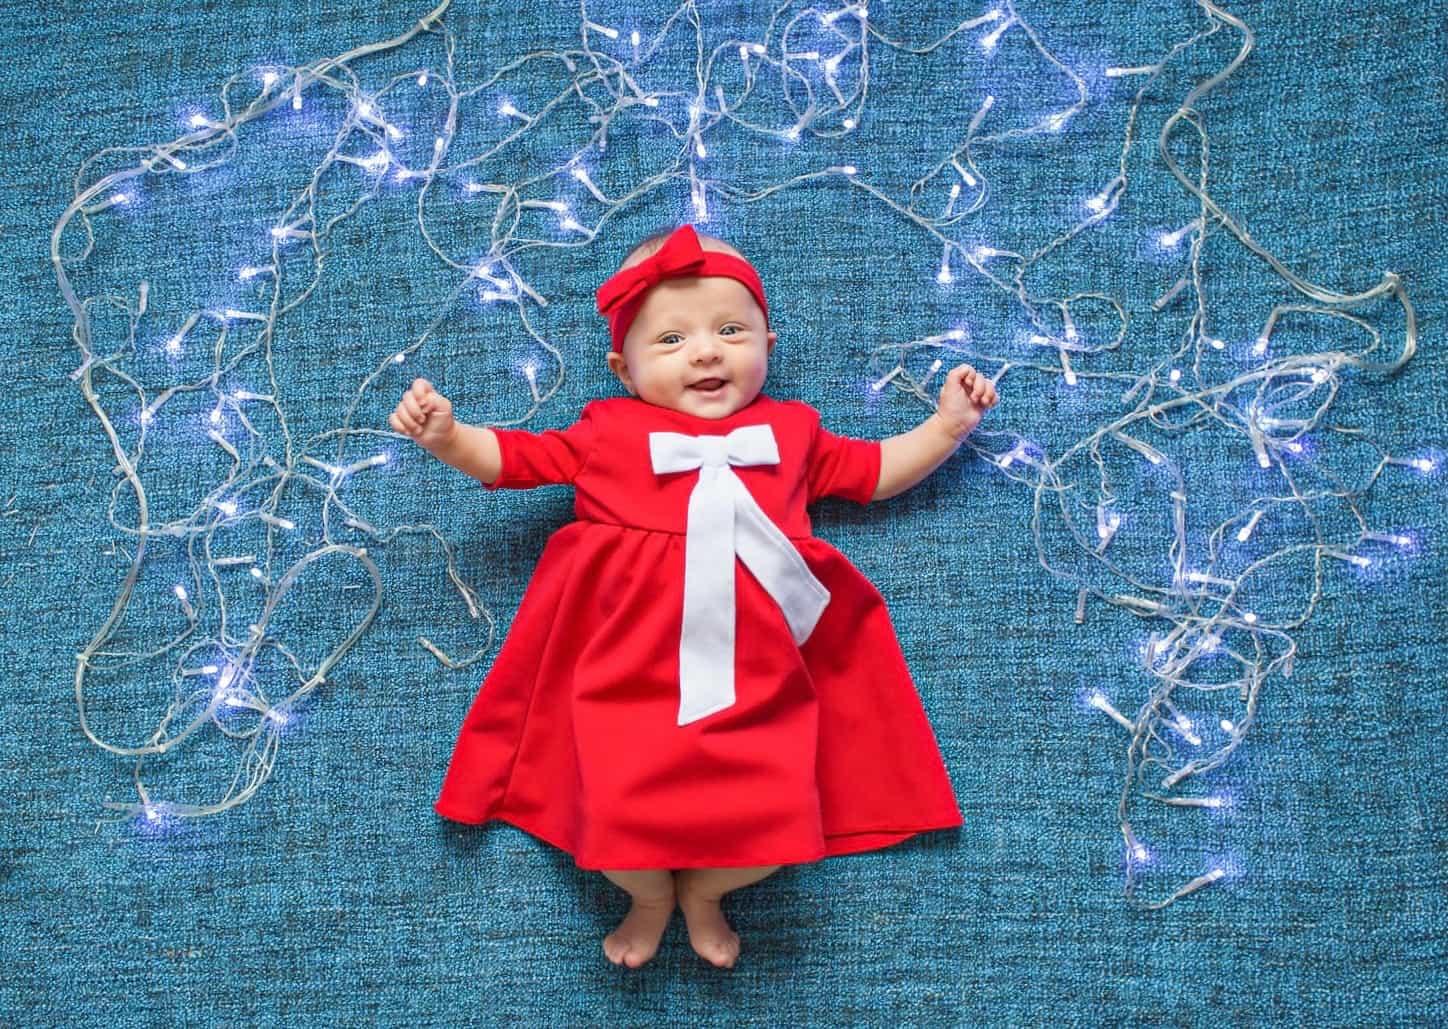 Infant in red dress lies and smiles on a blue background with Christmas lights